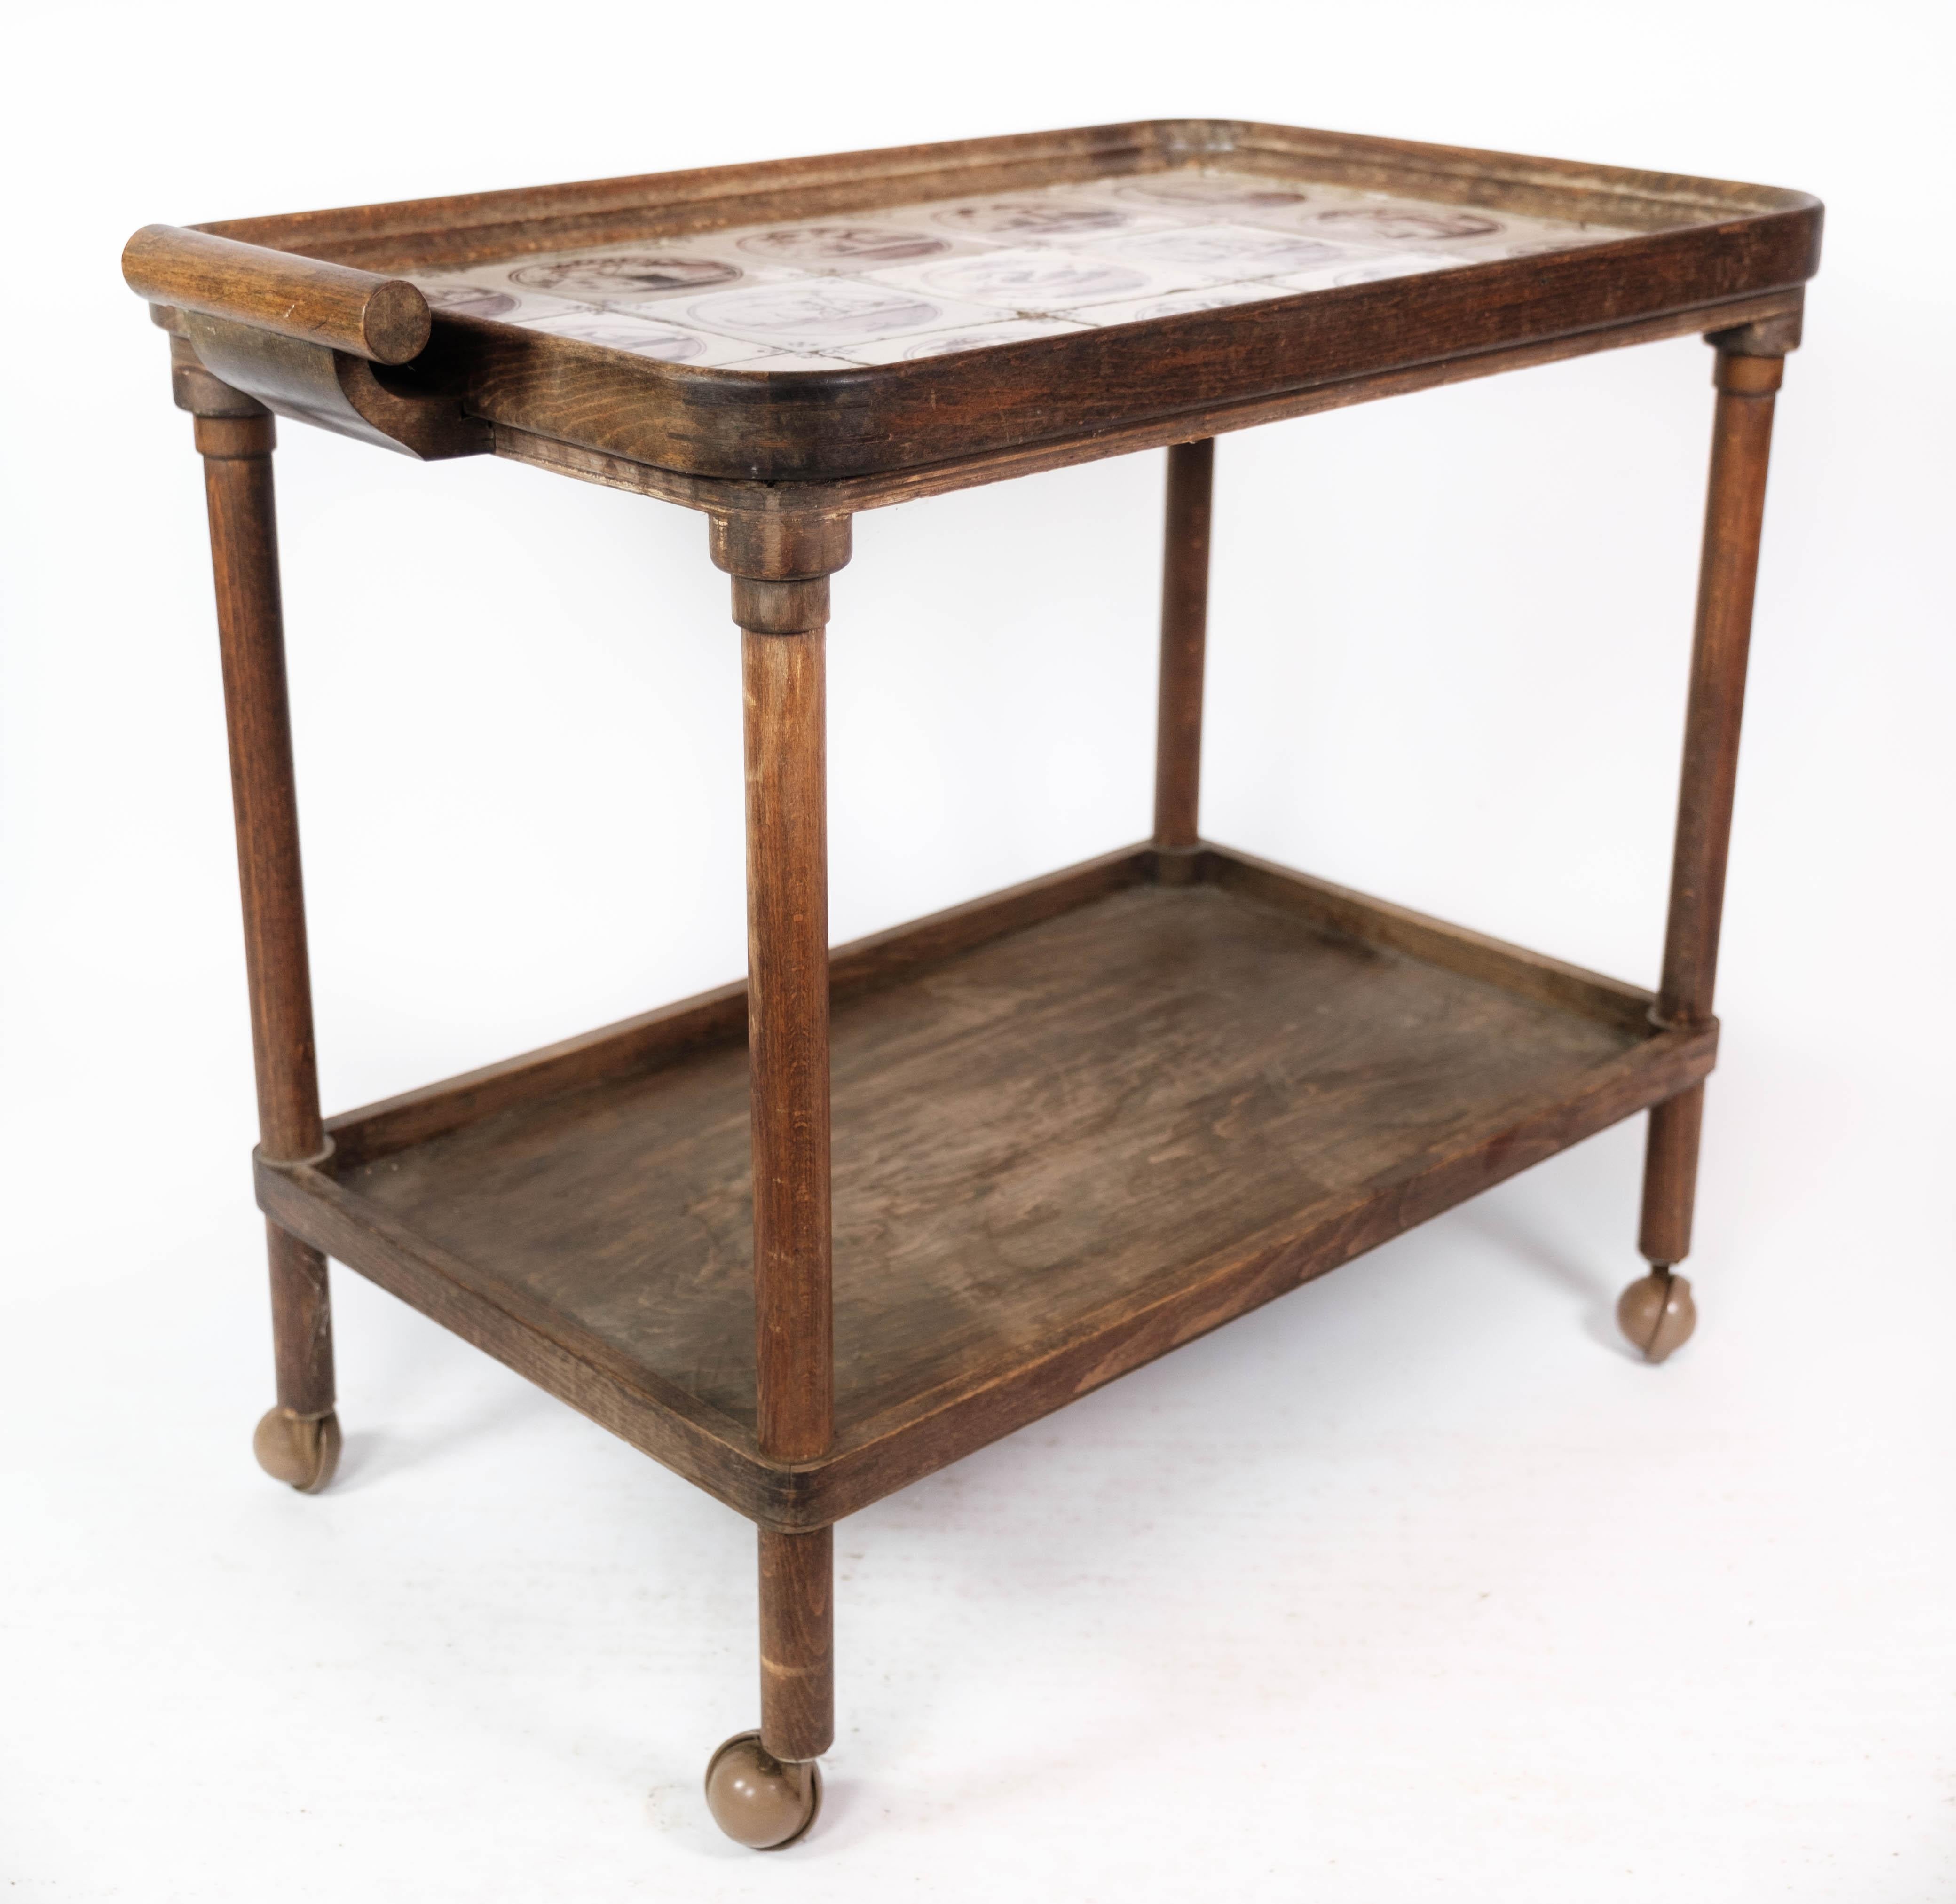 Danish Tray Table Dark Wood Decorated with Dutch Tiles, 1920s For Sale